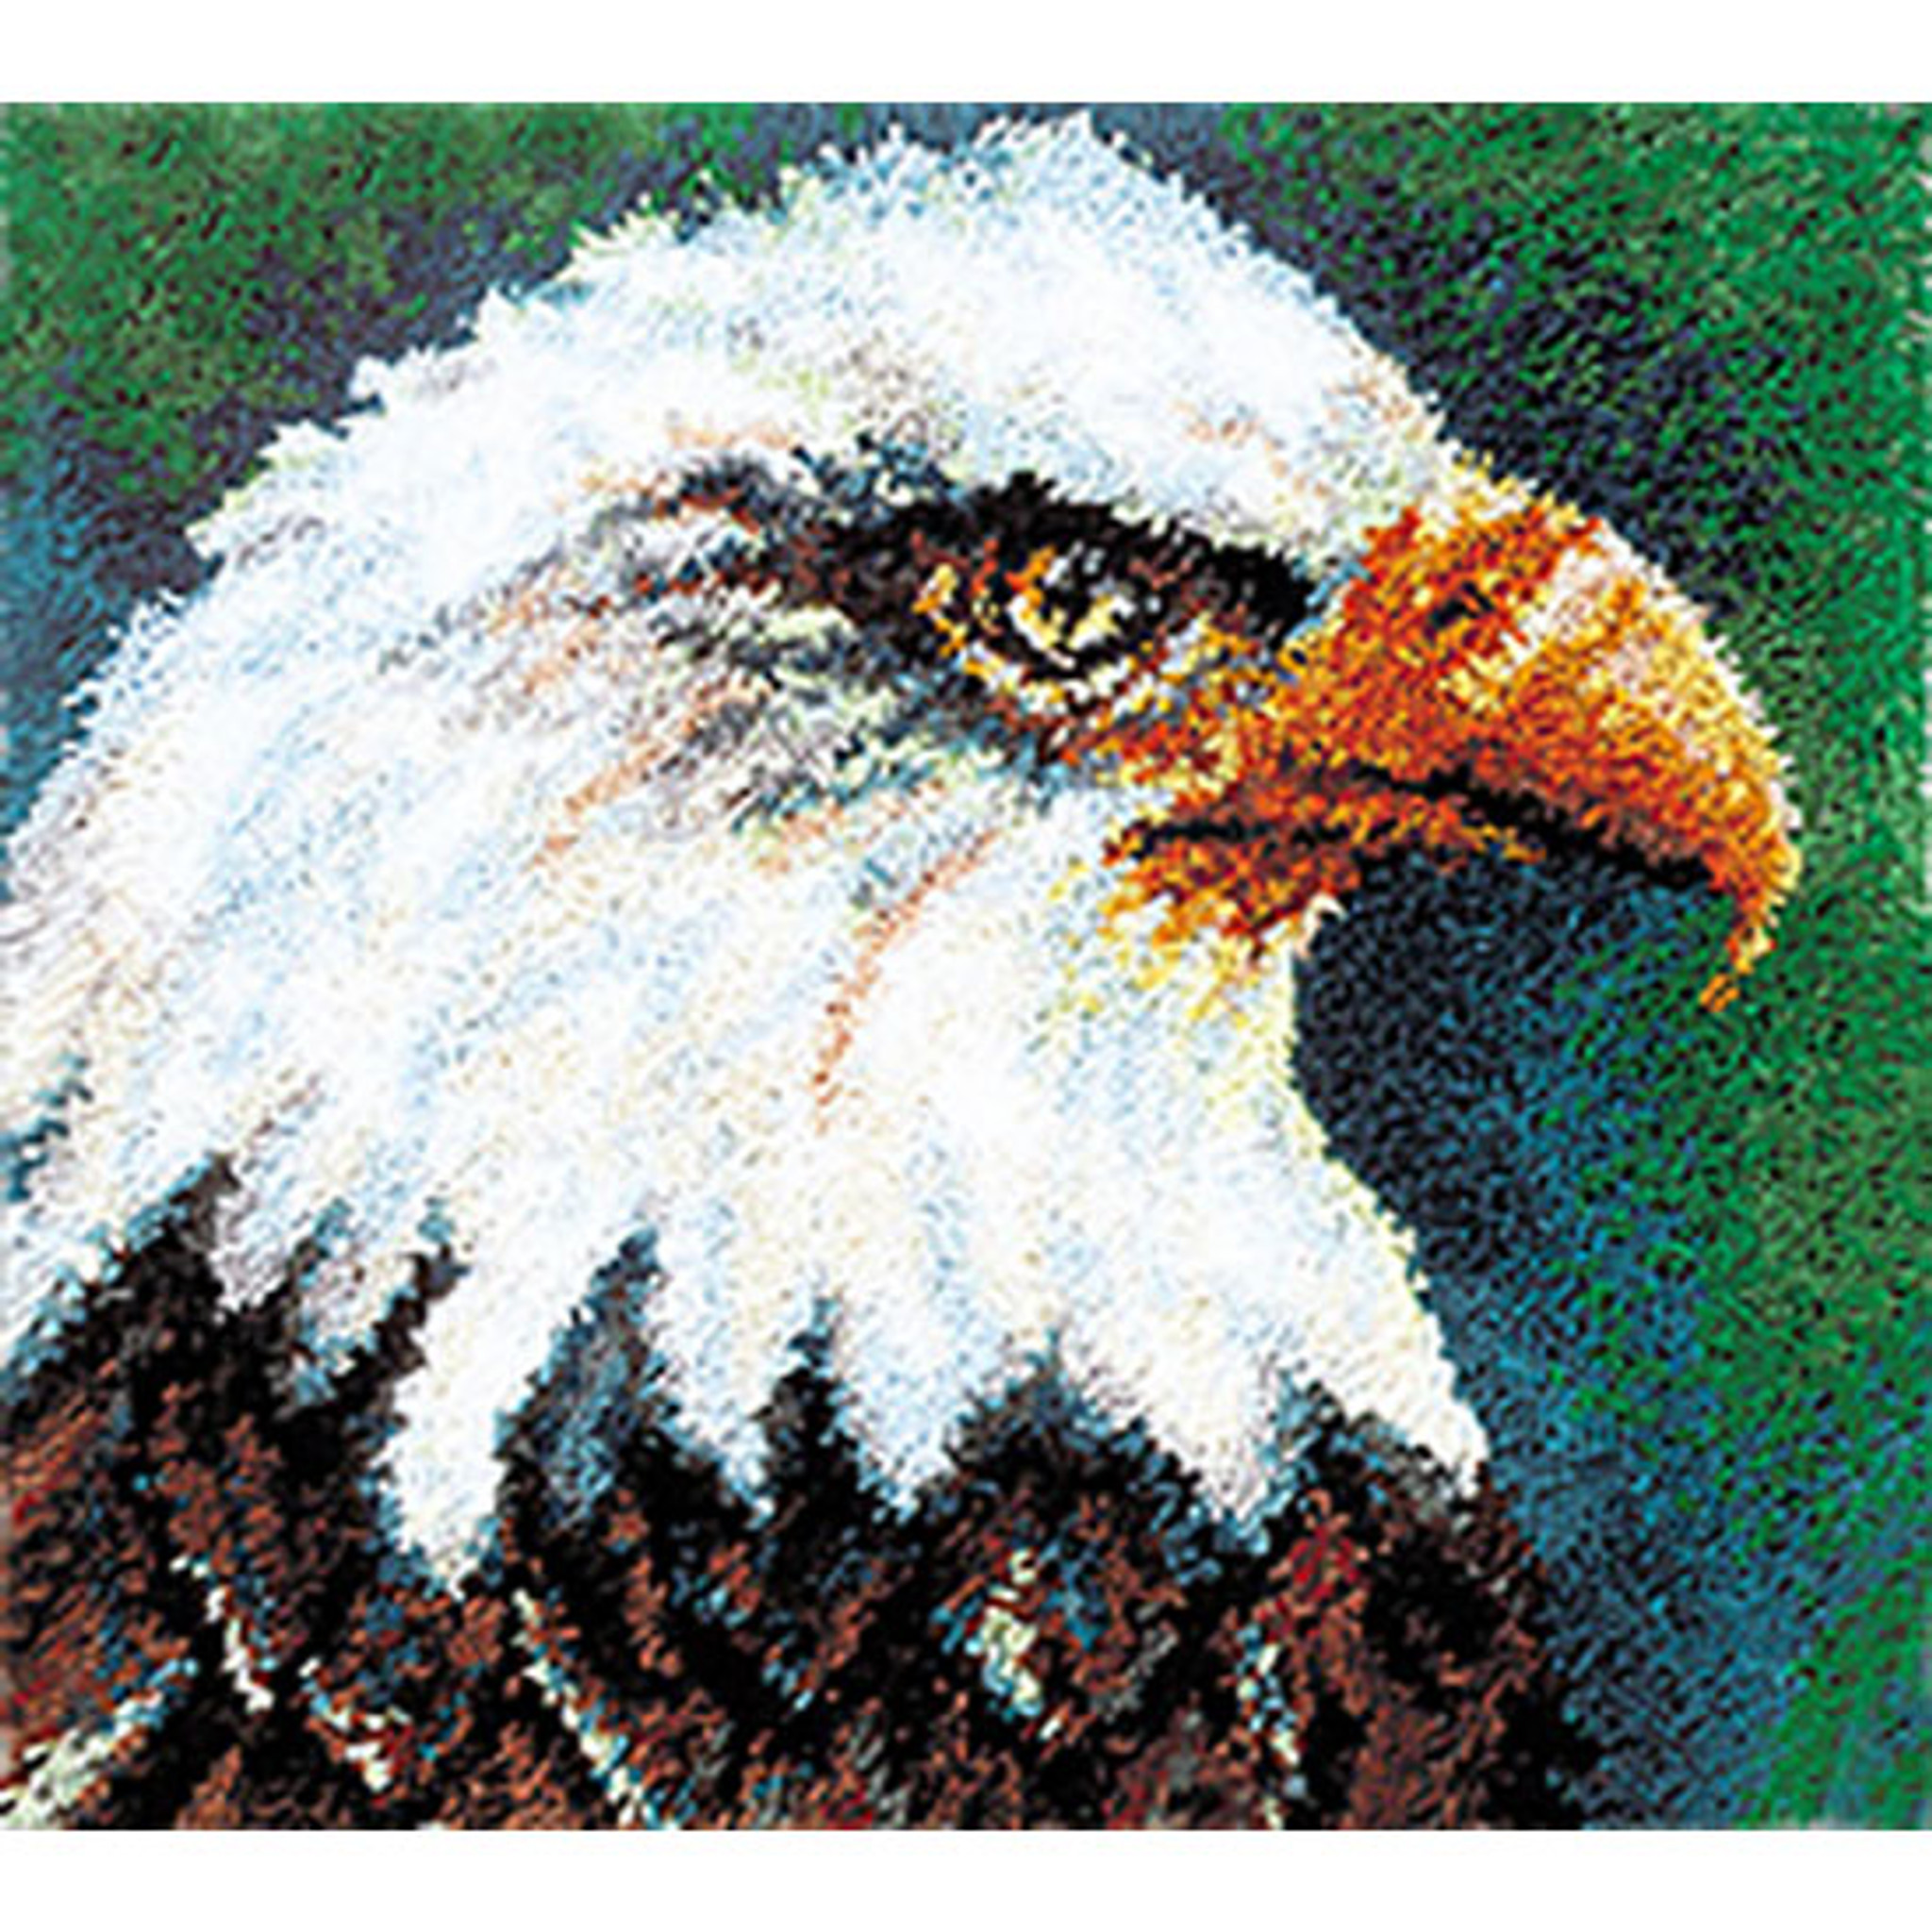 https://cdn11.bigcommerce.com/s-gp4gxi81t7/images/stencil/2048x2048/products/328/761/Eagle-Latch-Hook-Rug-Kit__69905.1515554917.jpg?c=2